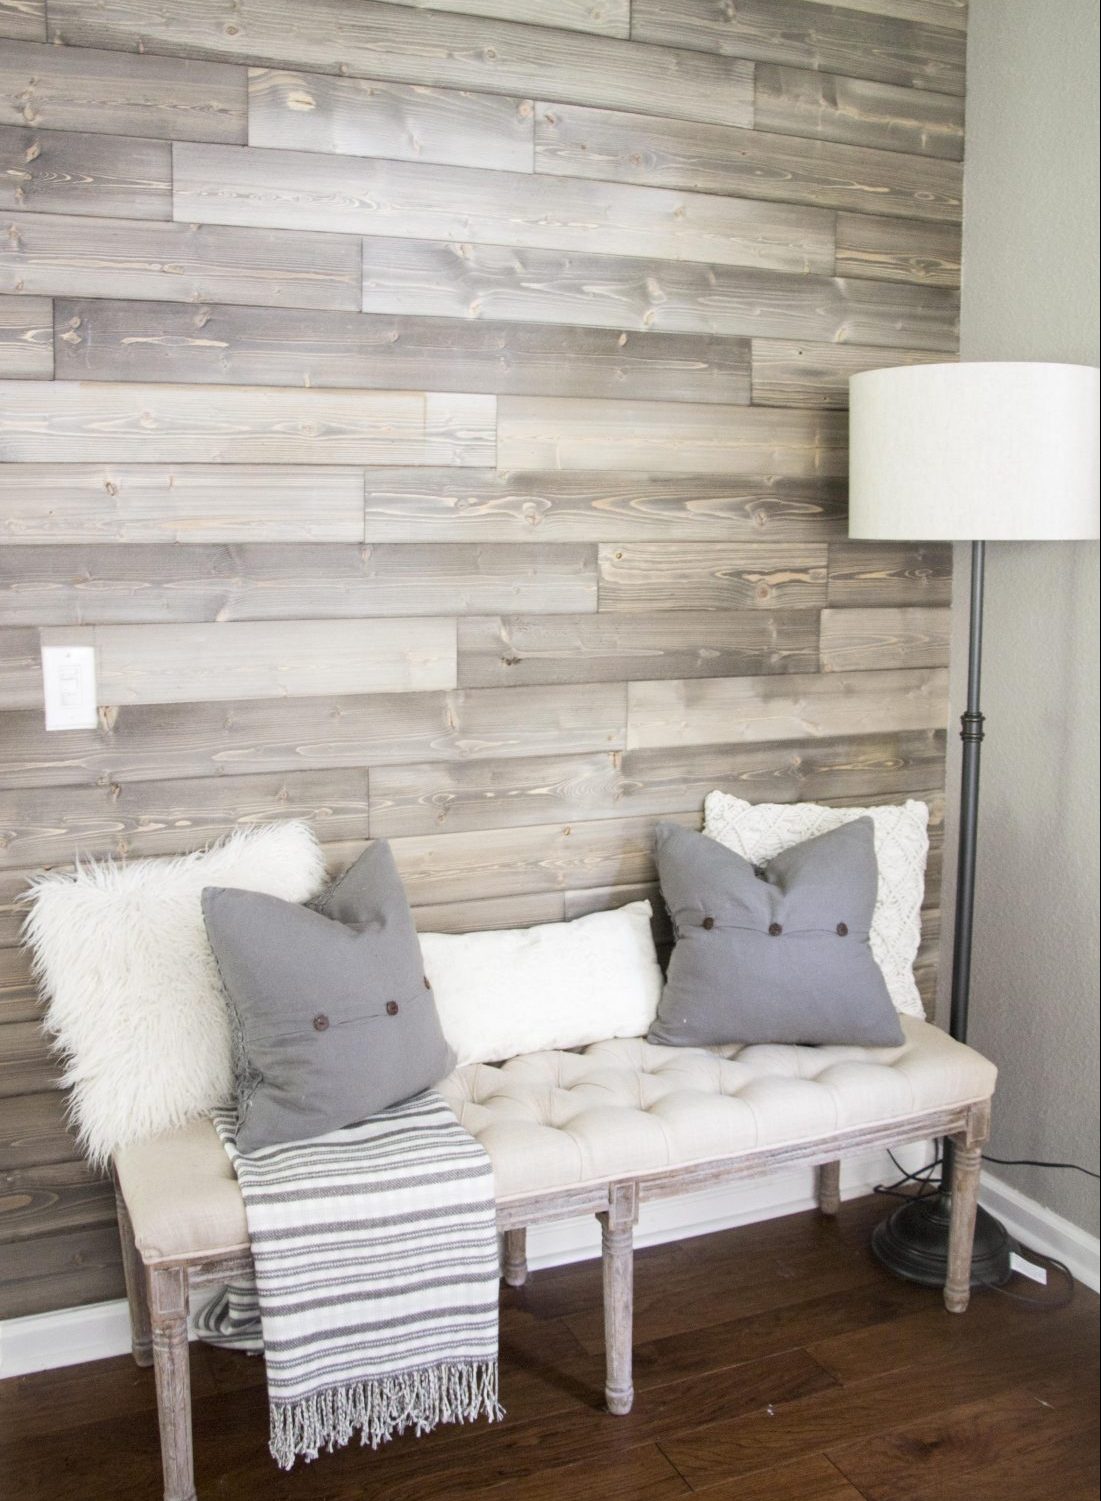 DIY SHIPLAP/WOOD WALL + OTHER WAYS TO ADD CHARACTER TO YOUR WALLS